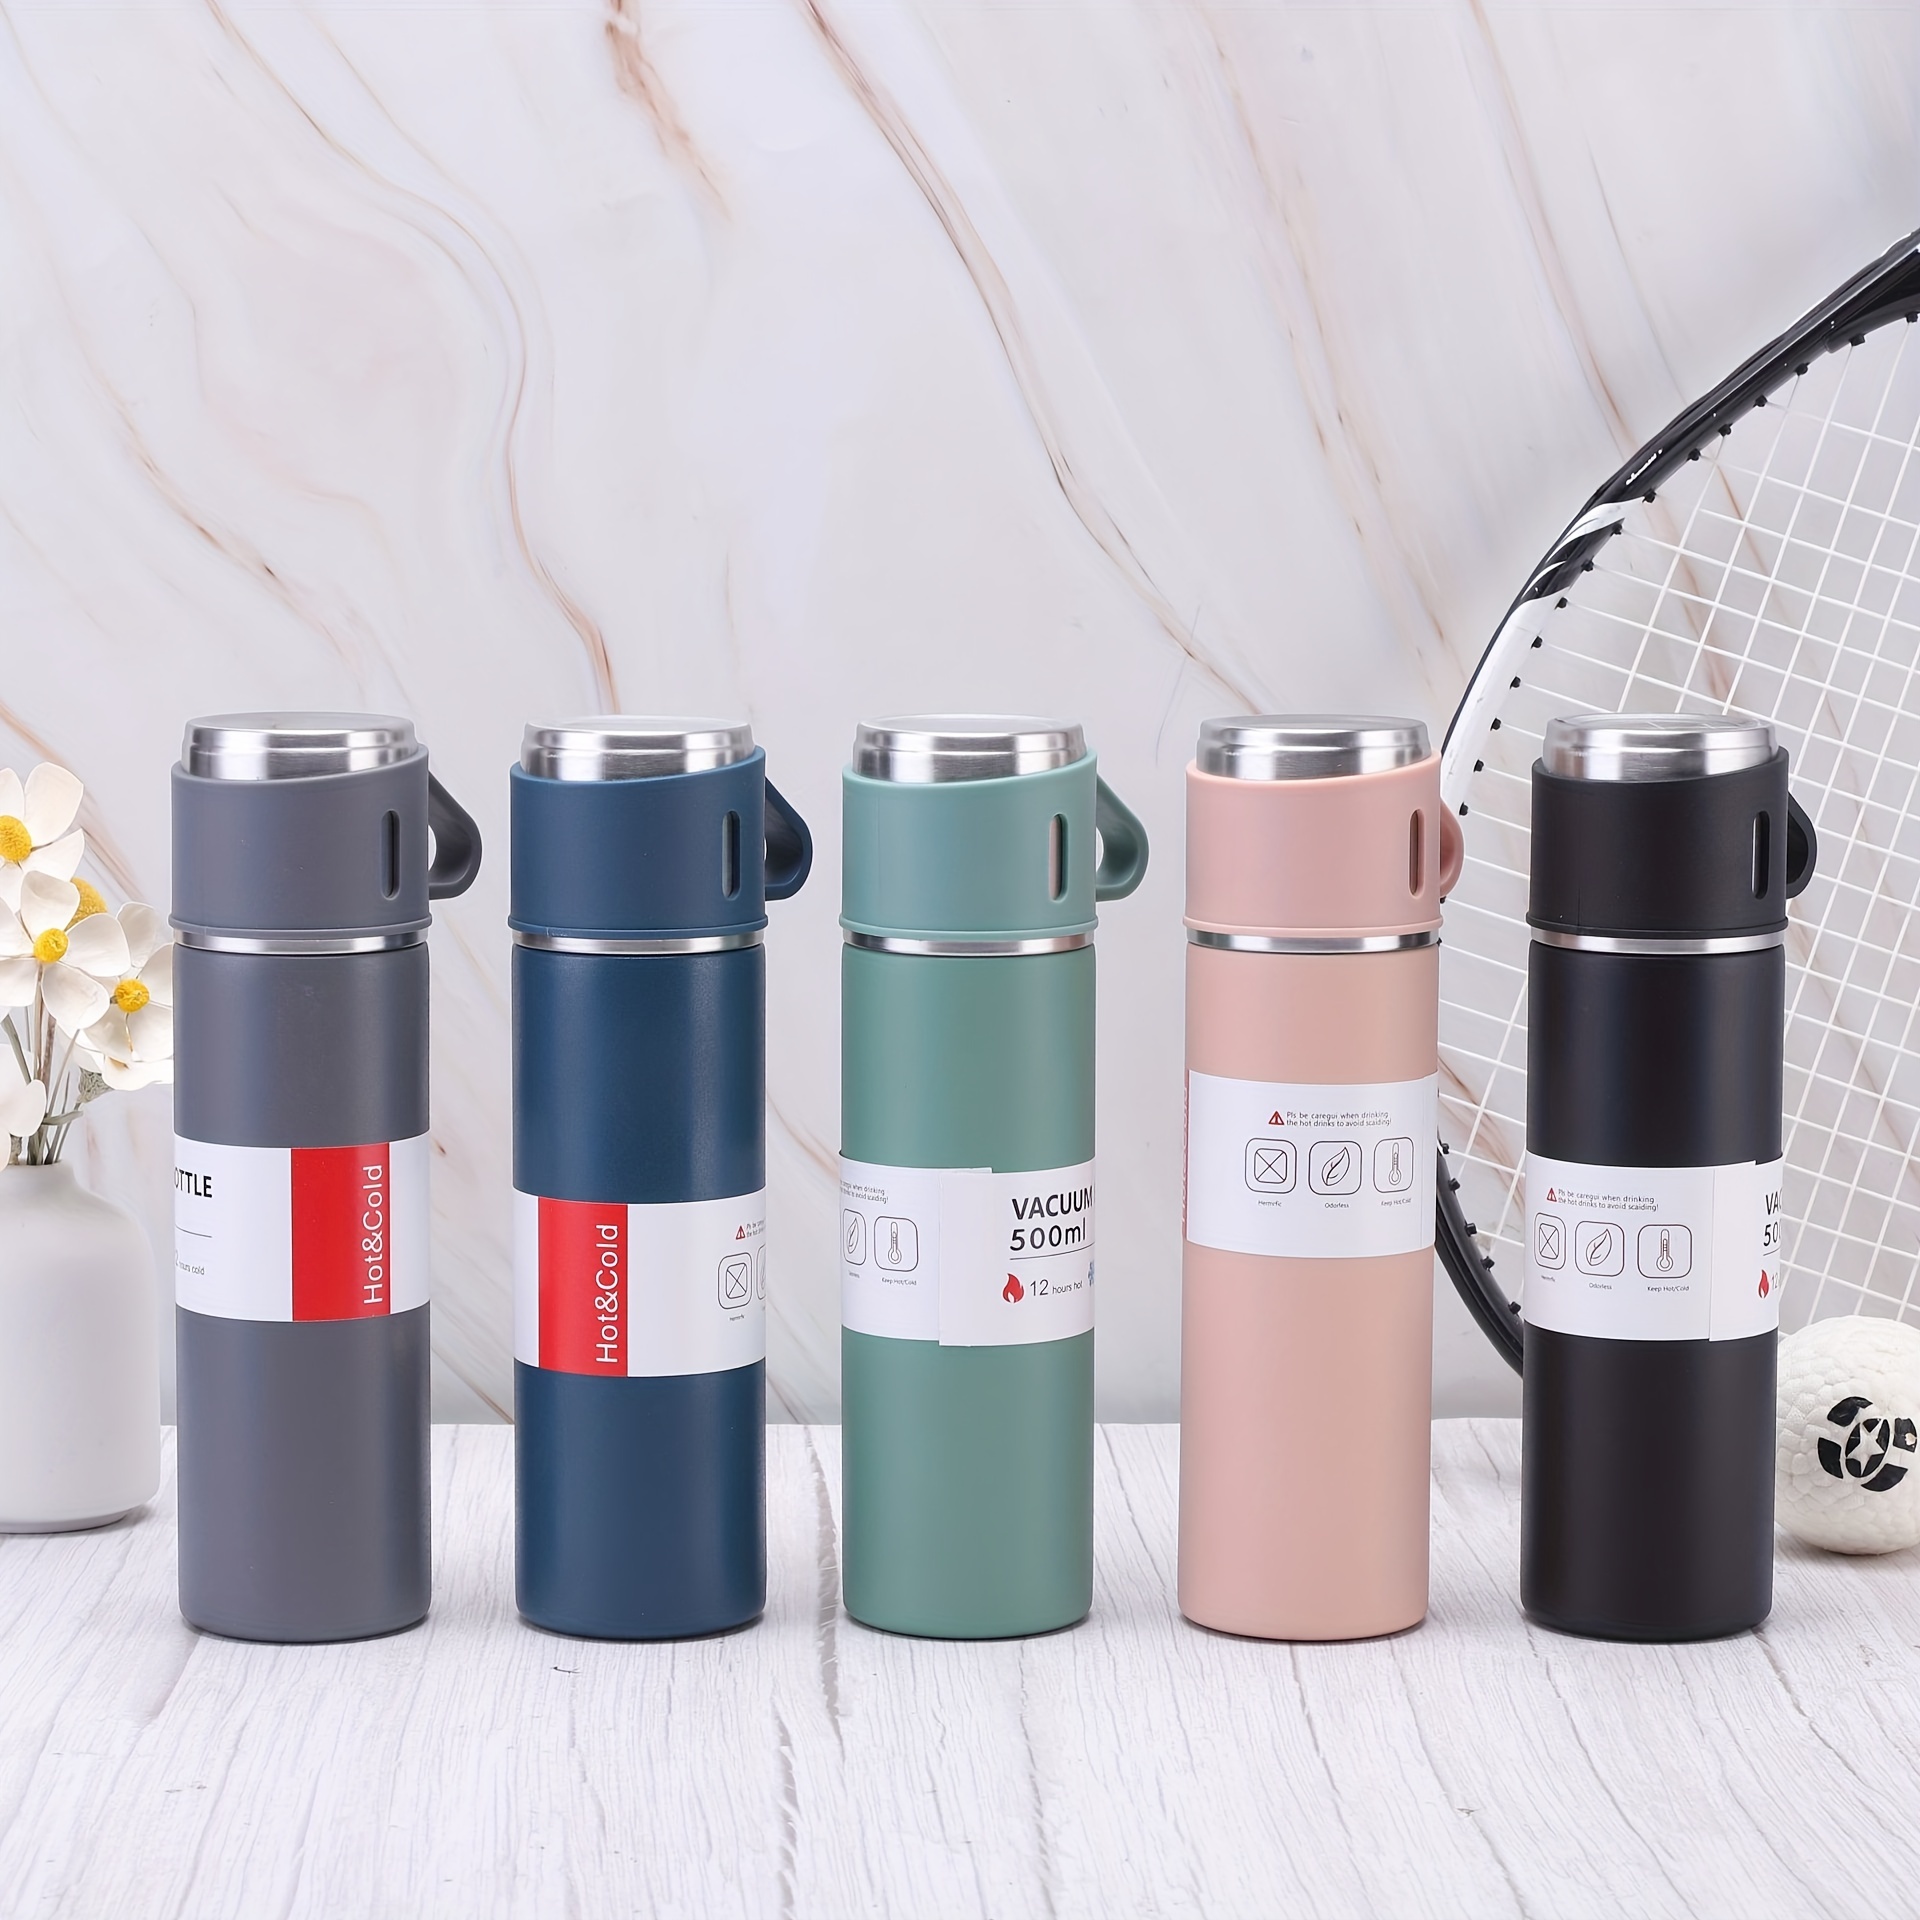 Vacuum Flask 500ml/17.6oz Insulated Flask Double Walled Vacuum Flask Stainless Steel Thermo Bottle with Cup for Coffee Tea Hot Drink and Cold Drink